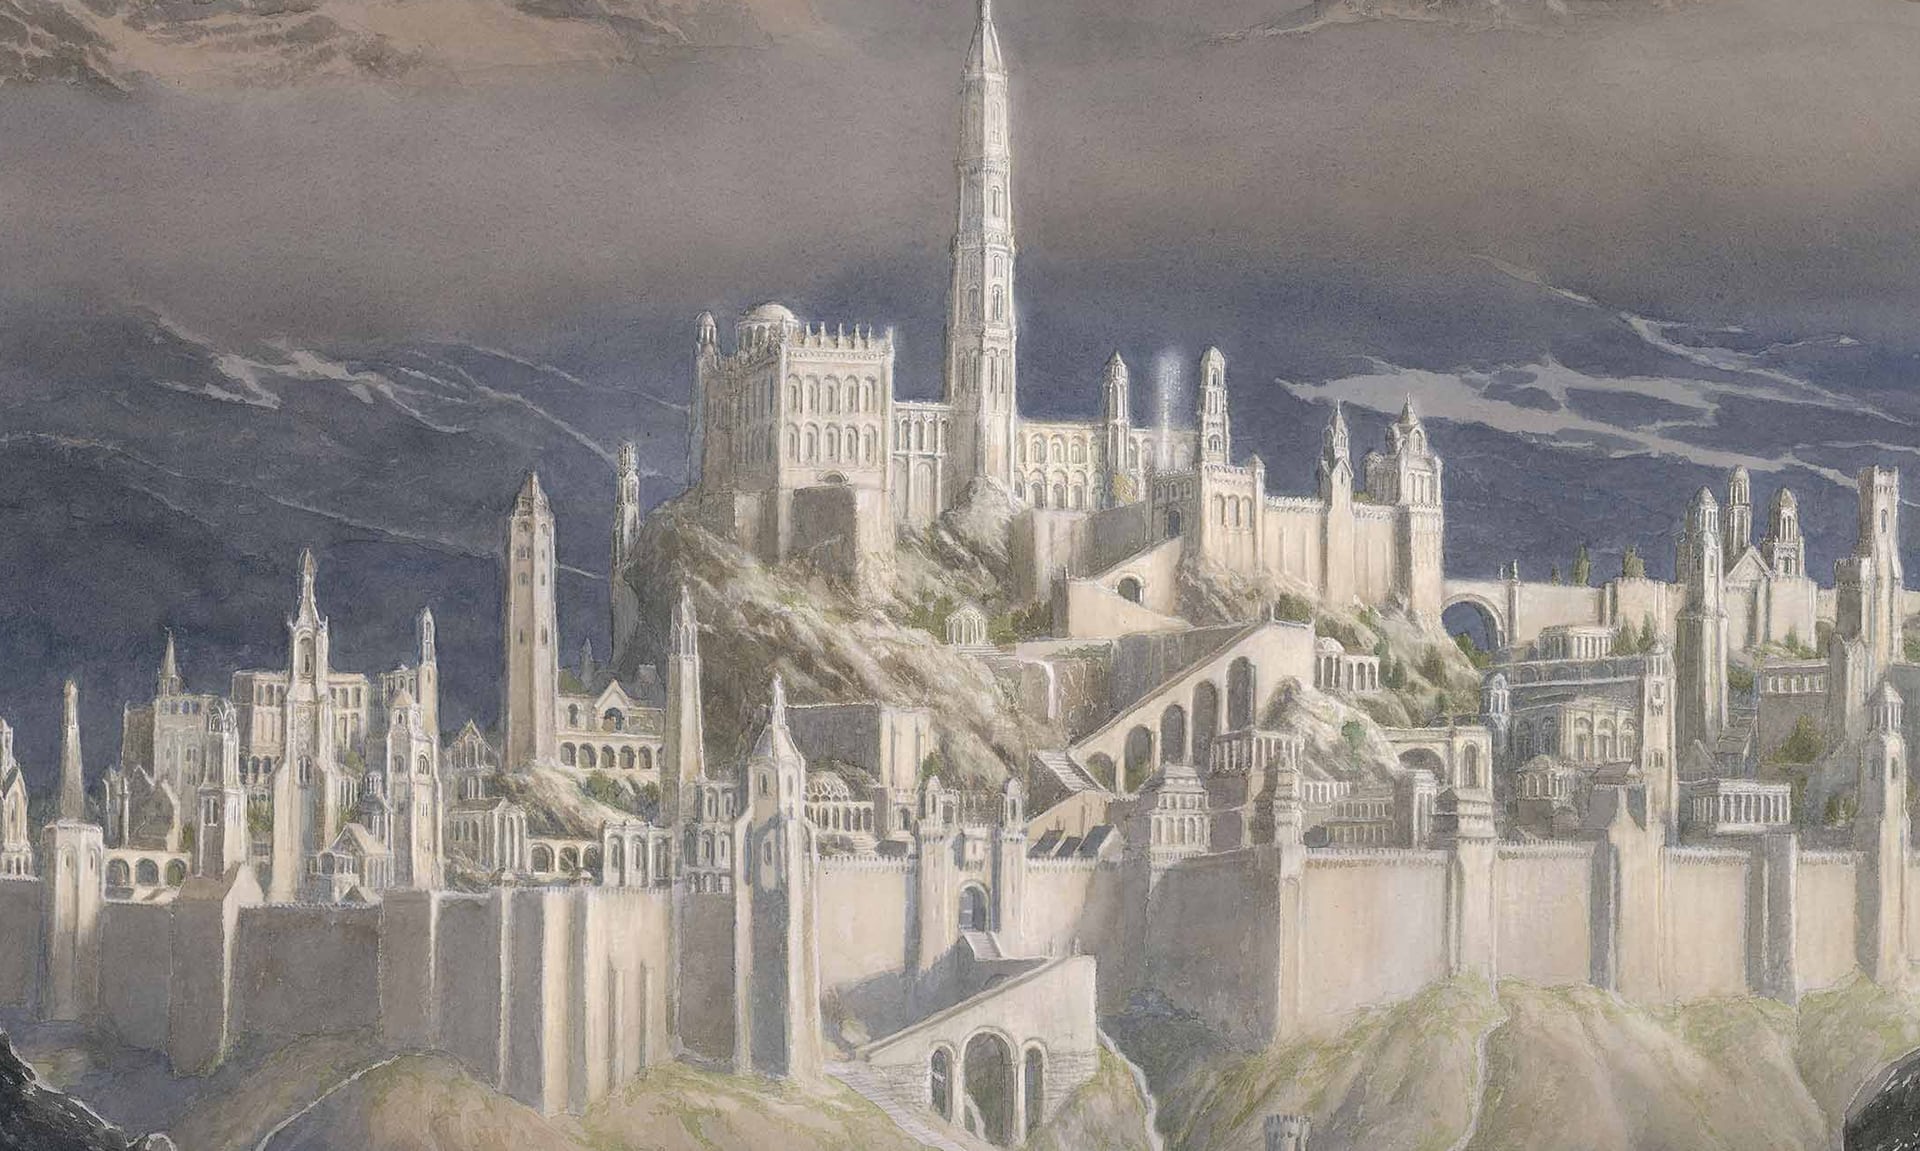 A New J.R.R. Tolkien Book Is Coming This Summer